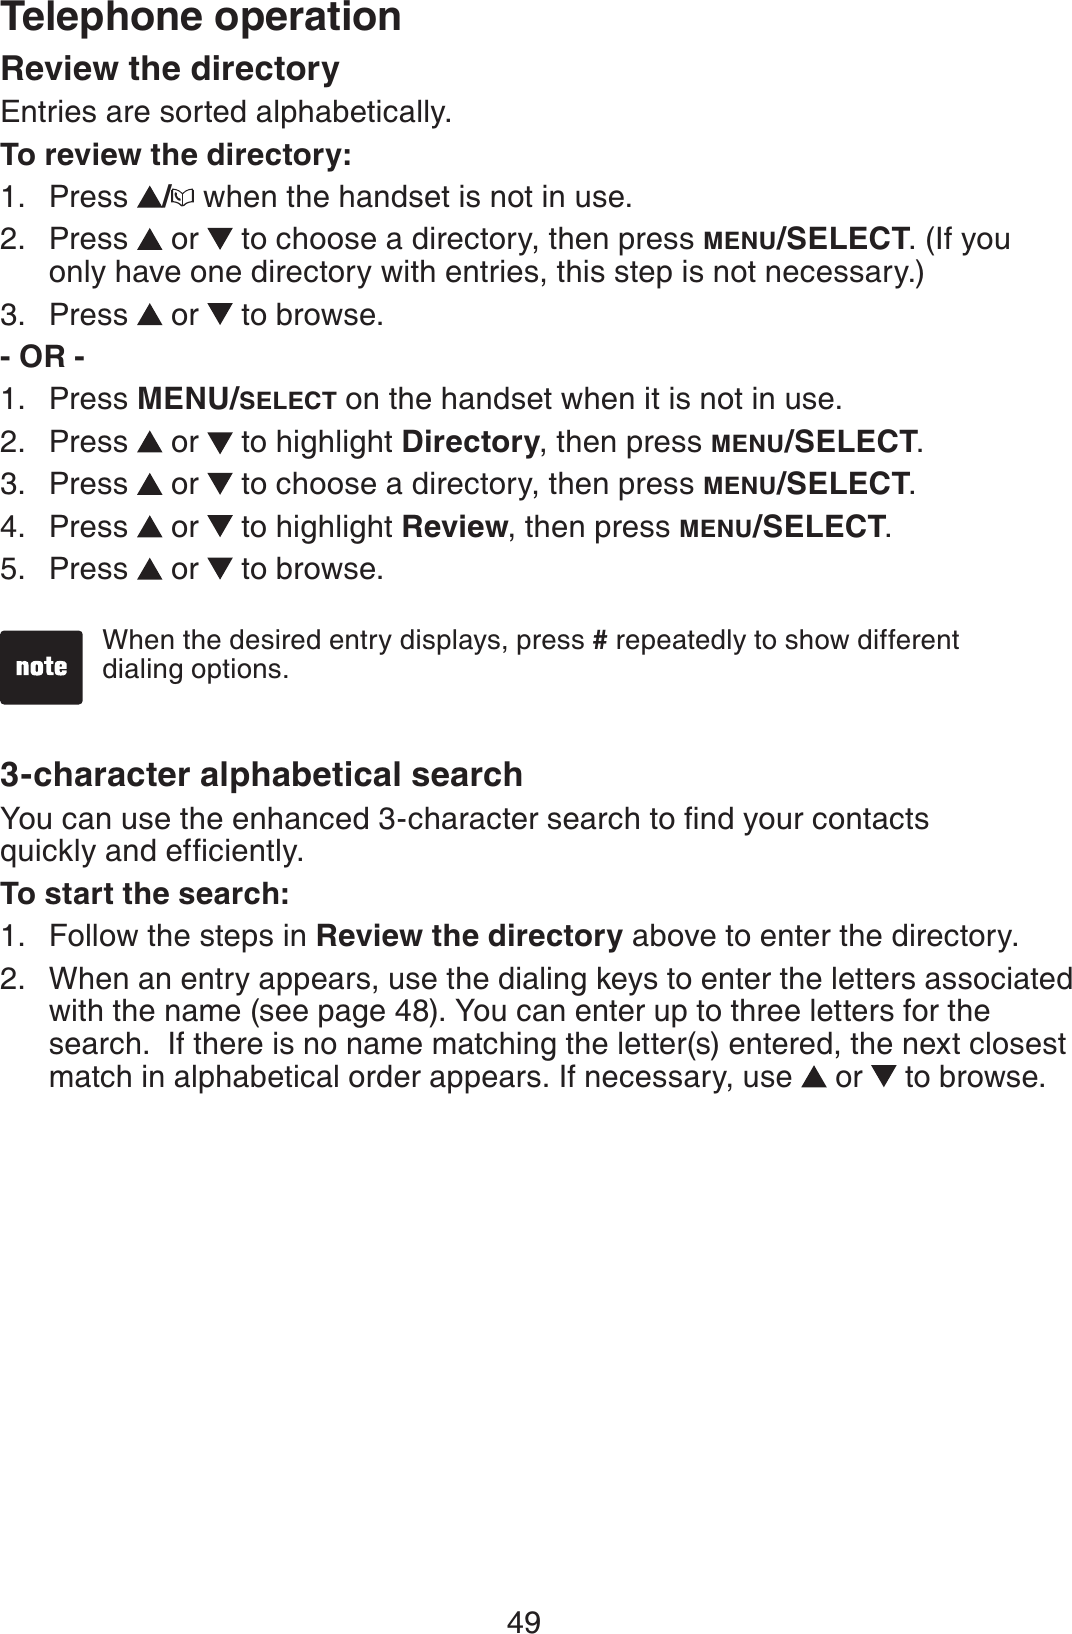 49Telephone operationReview the directoryEntries are sorted alphabetically.To review the directory:Press  / when the handset is not in use.Press  or   to choose a directory, then press MENU/SELECT. (If you only have one directory with entries, this step is not necessary.)Press  or   to browse.- OR -Press MENU/SELECT on the handset when it is not in use.Press   or   to highlight Directory, then press MENU/SELECT.Press  or   to choose a directory, then press MENU/SELECT.Press  or   to highlight Review, then press MENU/SELECT.Press  or   to browse.3-character alphabetical search;QWECPWUGVJGGPJCPEGFEJCTCEVGTUGCTEJVQſPF[QWTEQPVCEVUSWKEMN[CPFGHſEKGPVN[To start the search:Follow the steps in Review the directory above to enter the directory.When an entry appears, use the dialing keys to enter the letters associated with the name (see page 48). You can enter up to three letters for the search.  If there is no name matching the letter(s) entered, the next closest match in alphabetical order appears. If necessary, use  or   to browse.1.2.3.1.2.3.4.5.1.2.When the desired entry displays, press # repeatedly to show different dialing options.